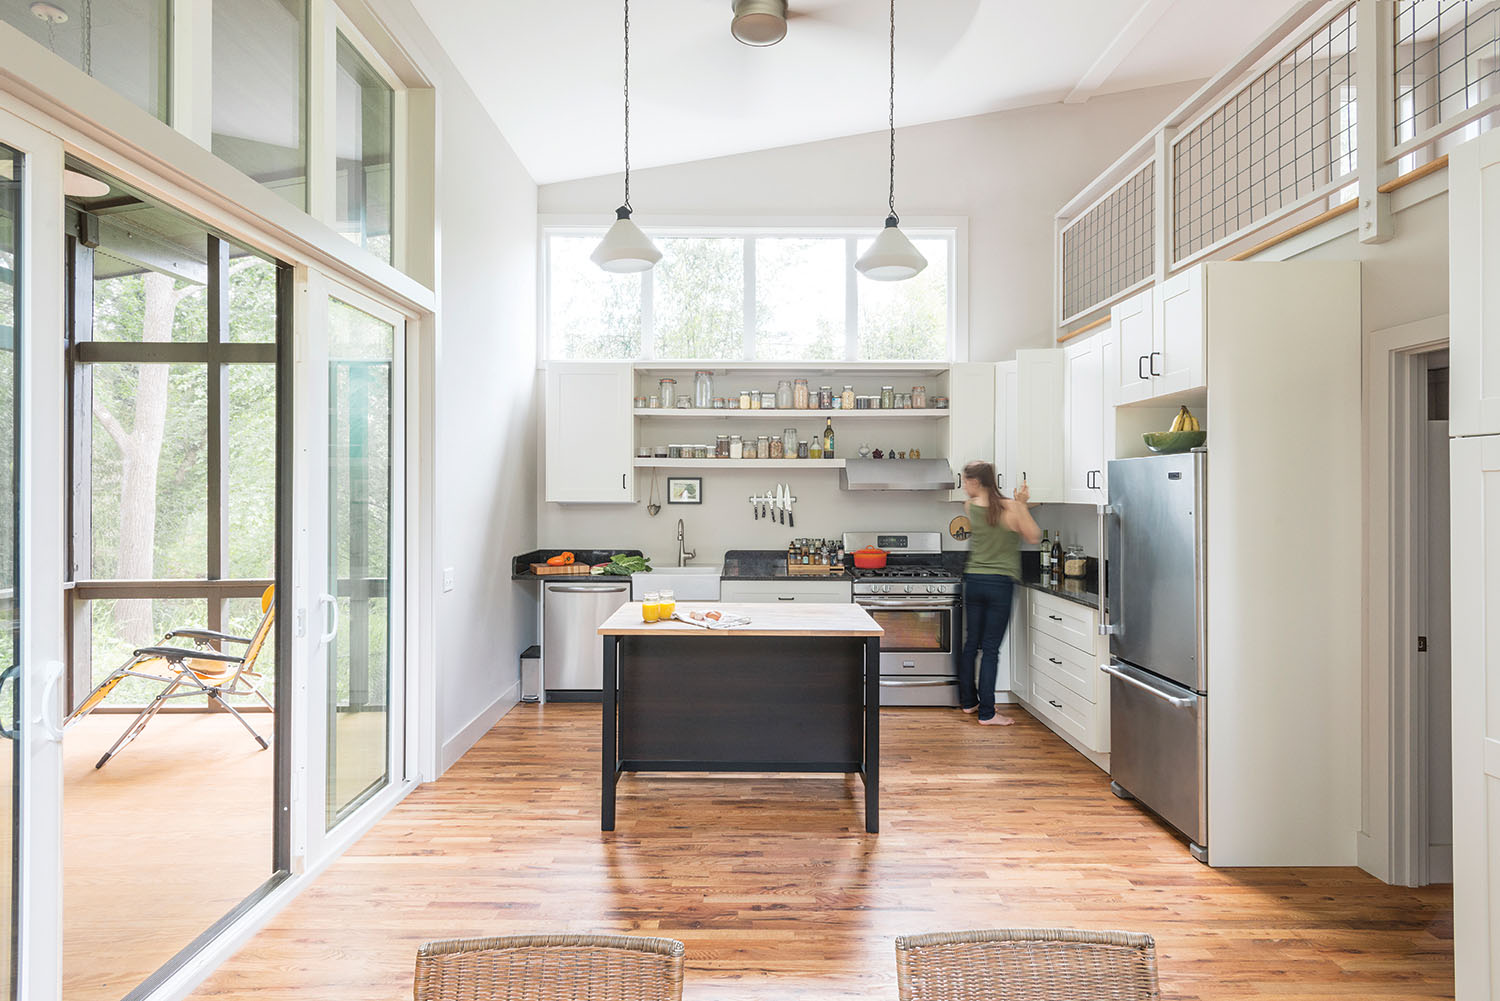 Homeowner Ali Haeffner enjoys a studio kitchen equipped with many features that open the space, including a vaulted ceiling and open shelving. Photos by Todd Crawford